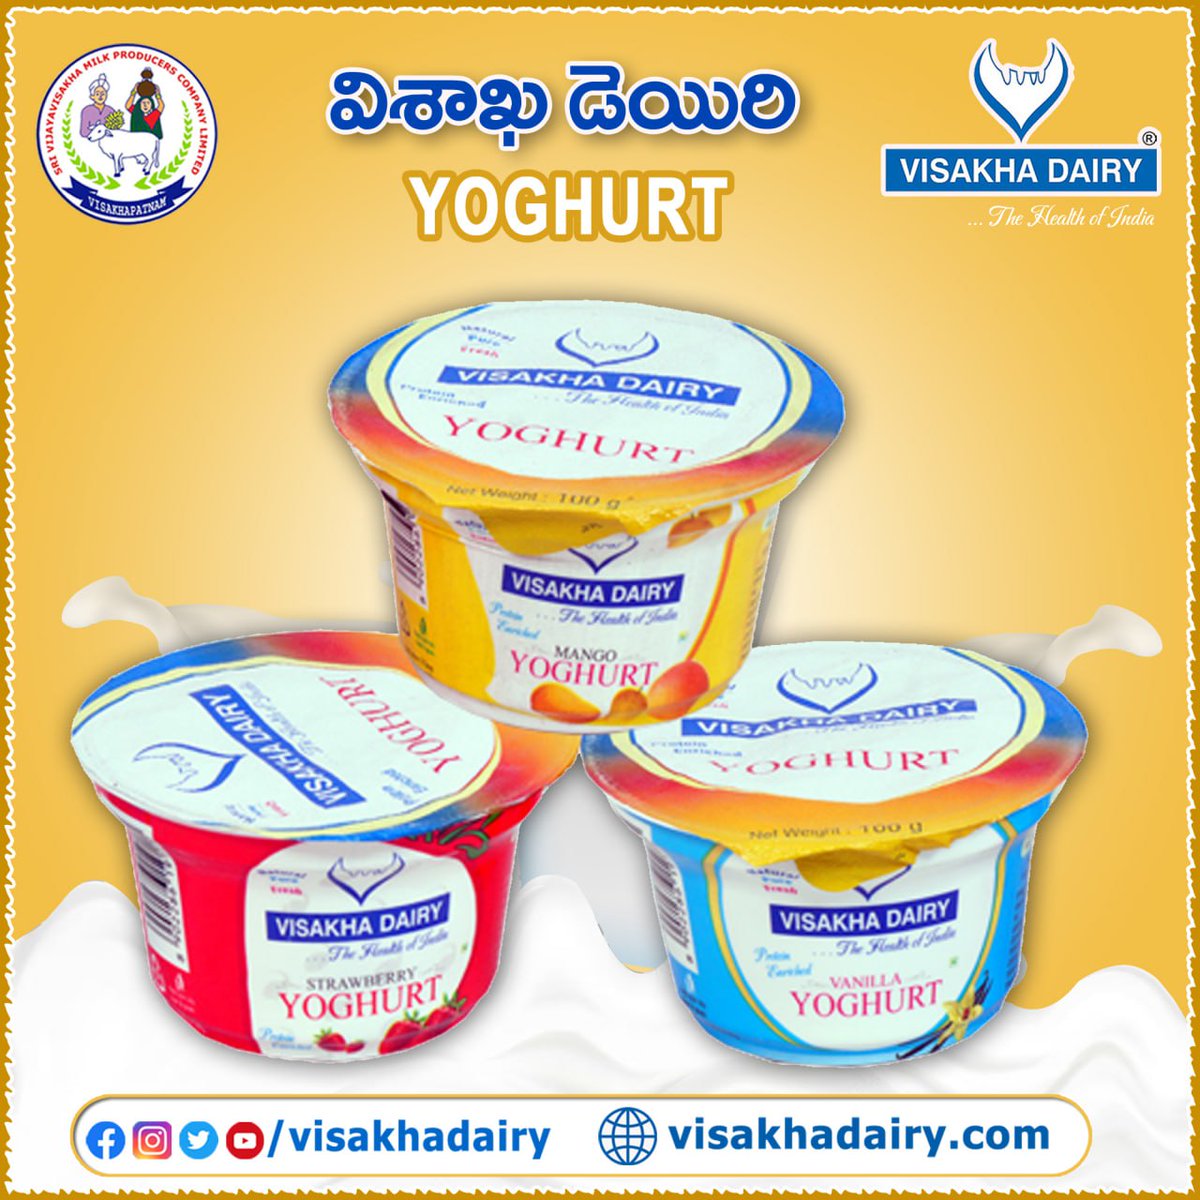 🥄 Indulge in the creamy goodness of Visakha Dairy's Yoghurt! 🥄

Looking for a delicious and nutritious snack? Look no further! Our yoghurt is available in convenient 100g packs and comes in three delightful flavors: Vanilla, Mango, and Strawberry.

 #CreamyDelight #TastyChoices